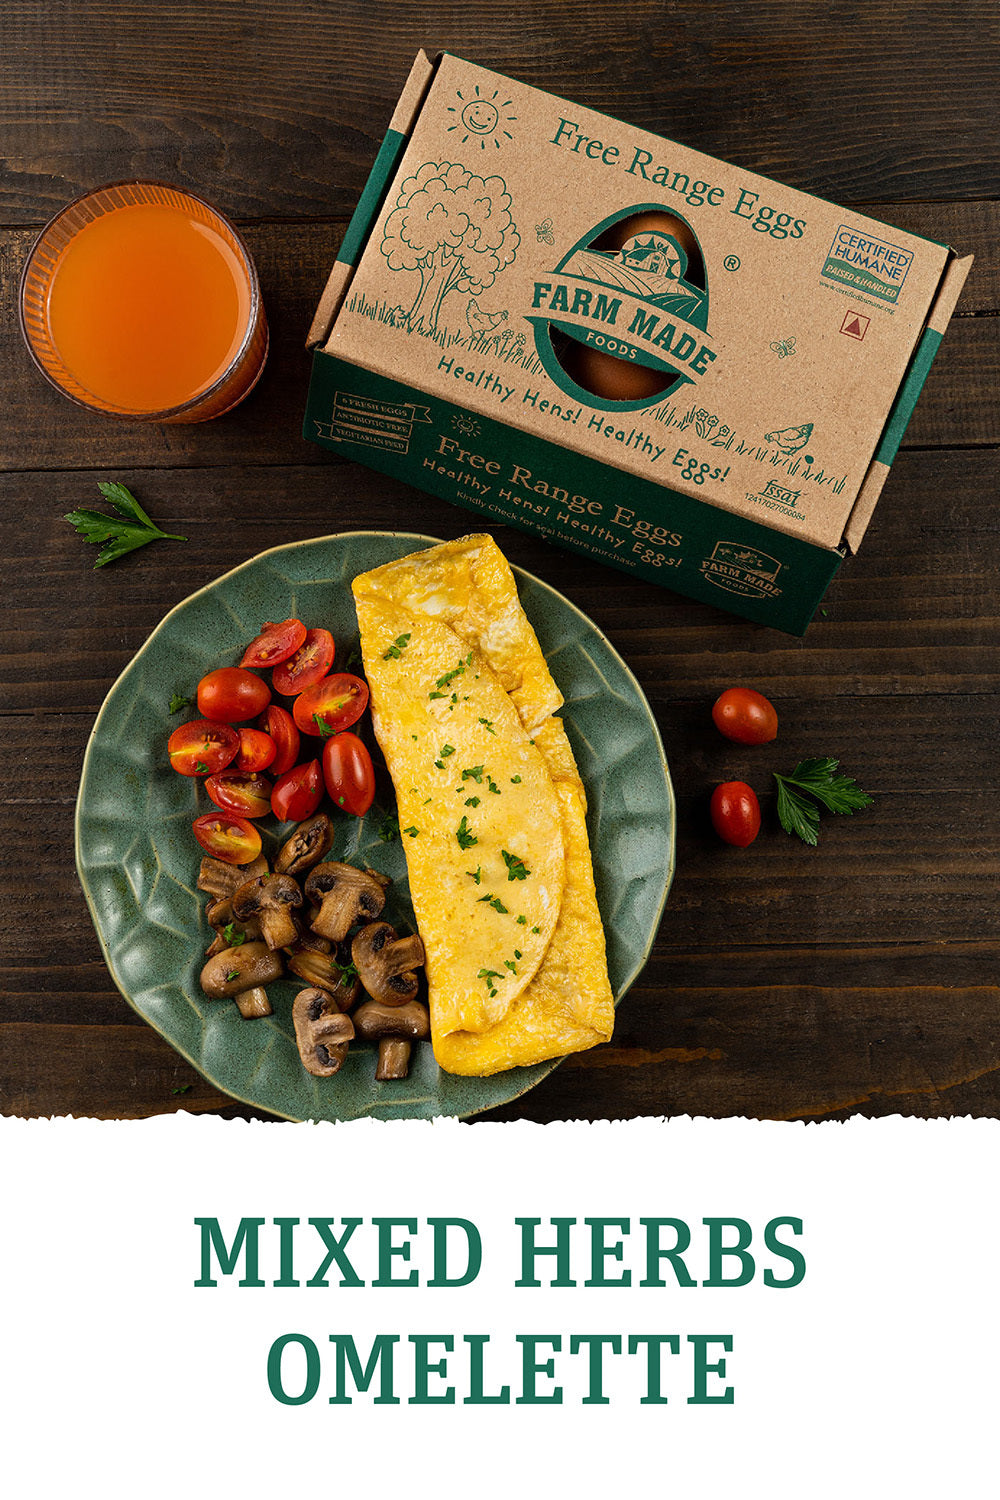 Mixed Herbs Omelette